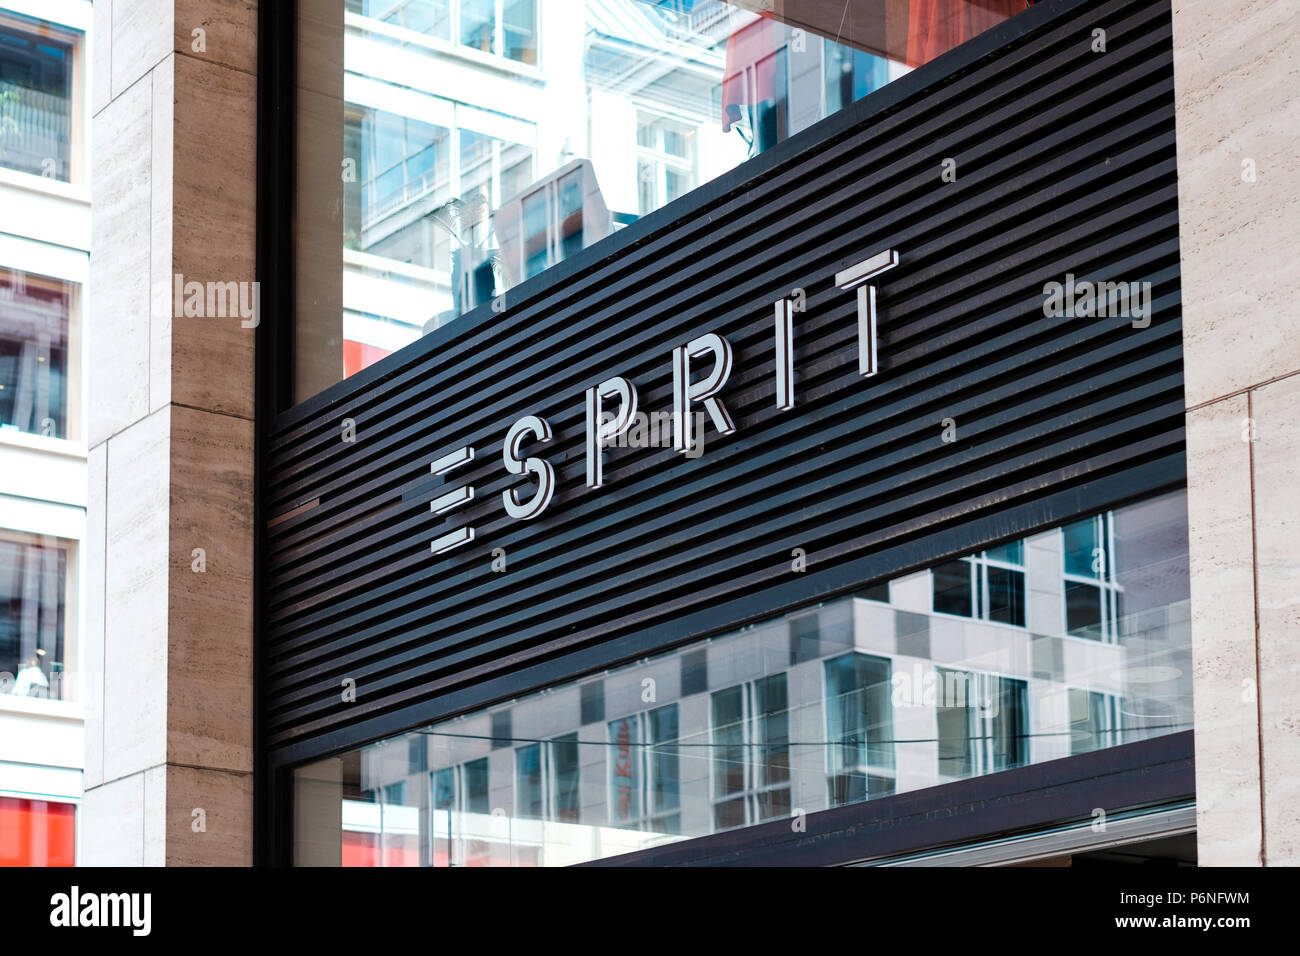 Berlin, Germany - june 2018: The Esprit logo on store exterior / shop  facade in Berlin, Germany Stock Photo - Alamy